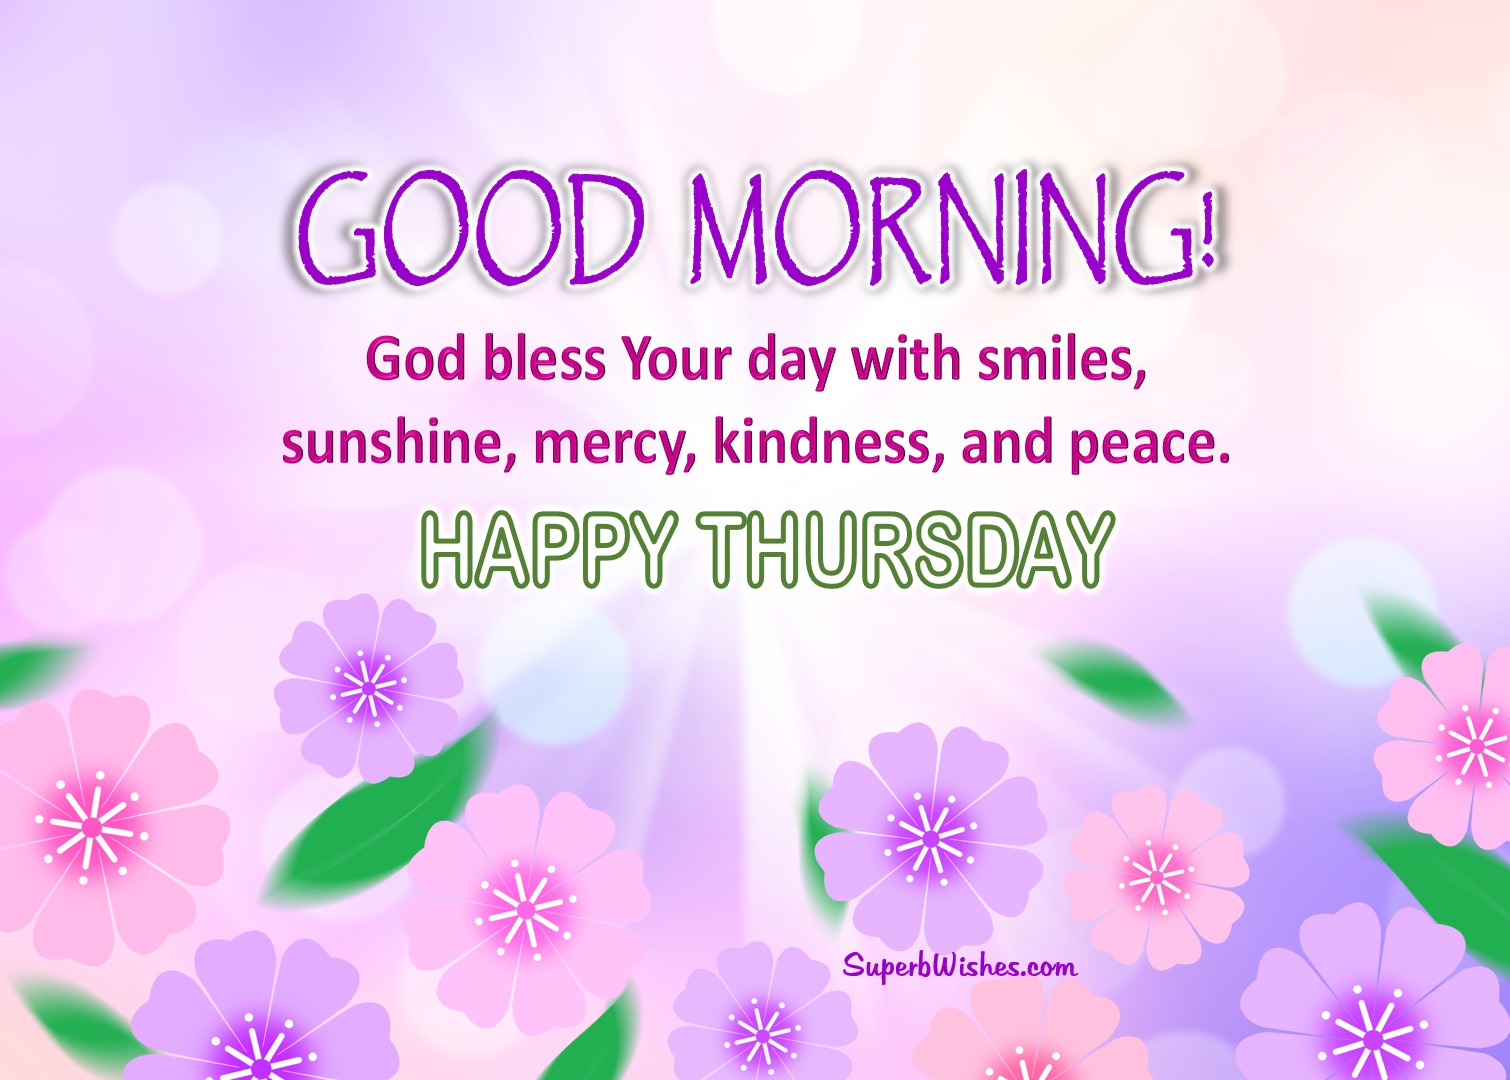 Happy Thursday 2023 Images - God Bless Your Day | SuperbWishes.com